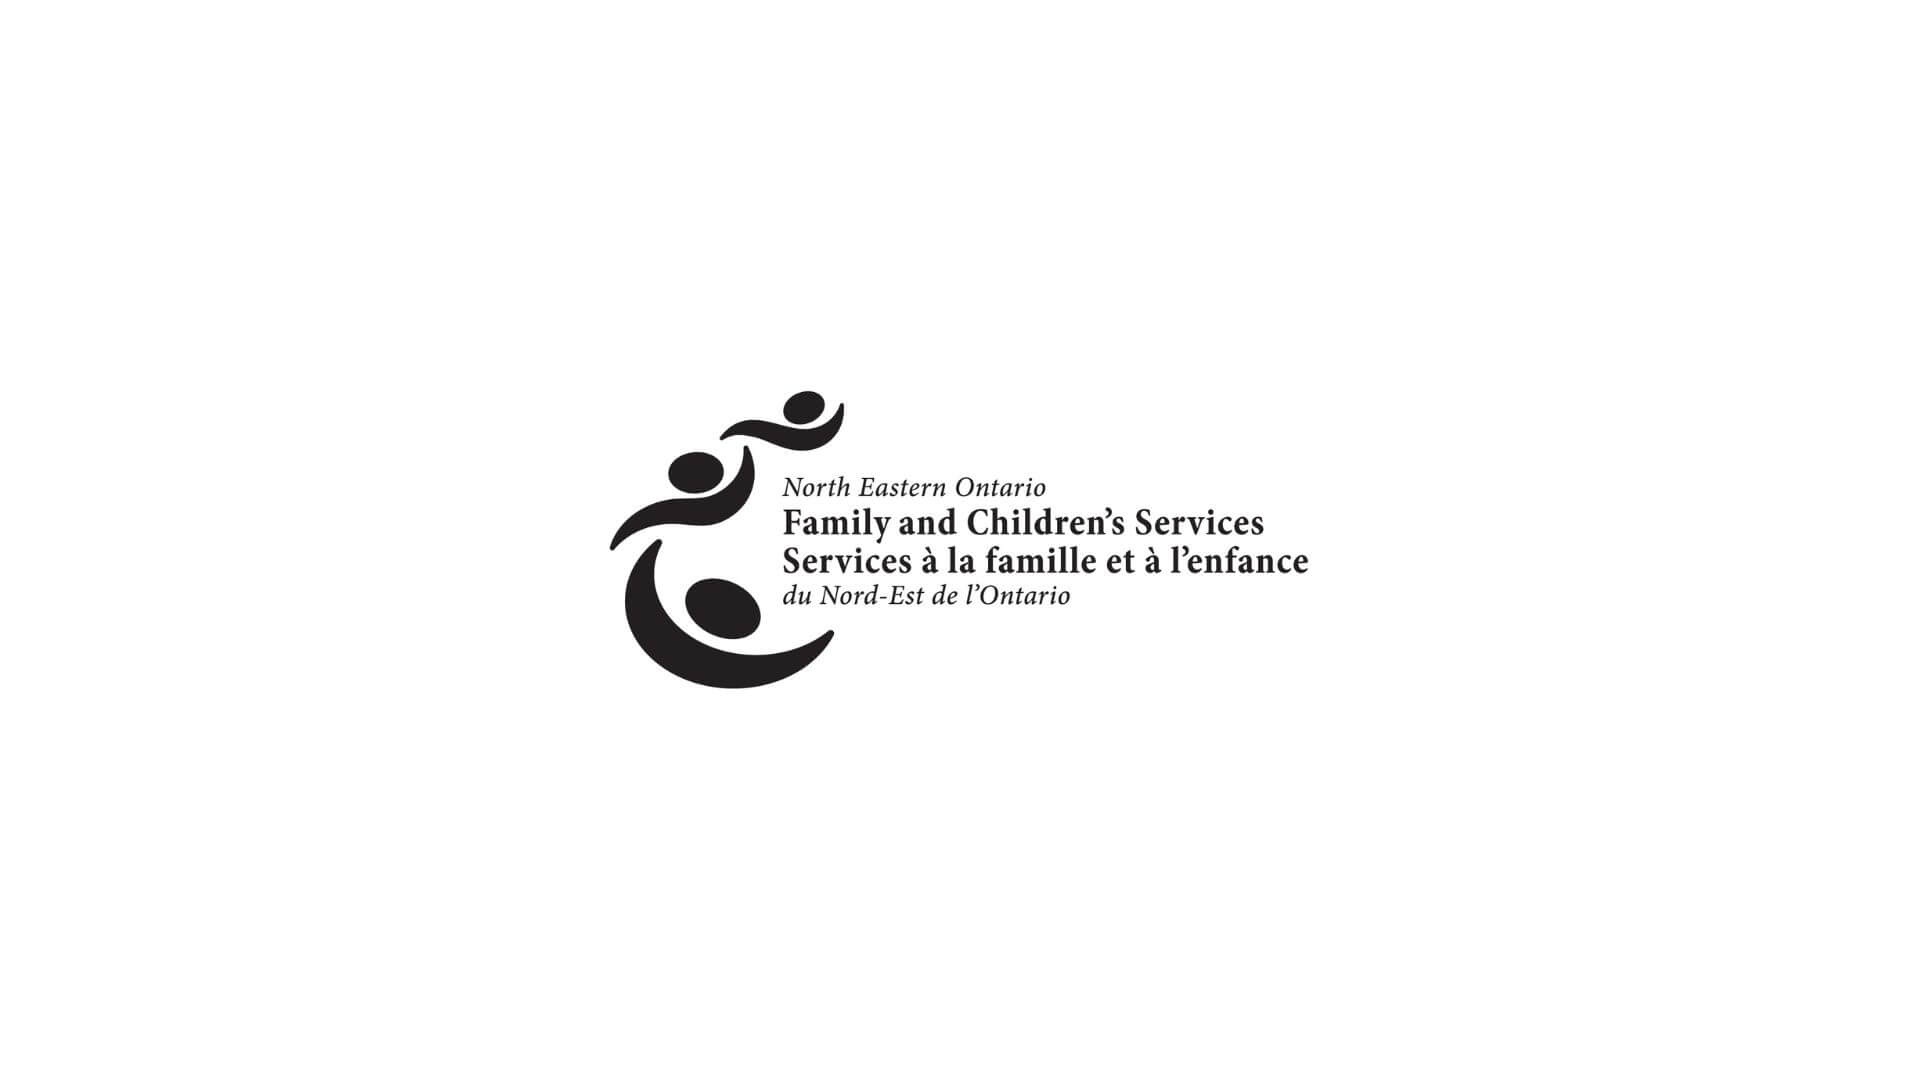 Timmins Care Logo of Timmins Care, North Eastern Ontario Family and Children's Services. Cochrane District Social Services Administration Board